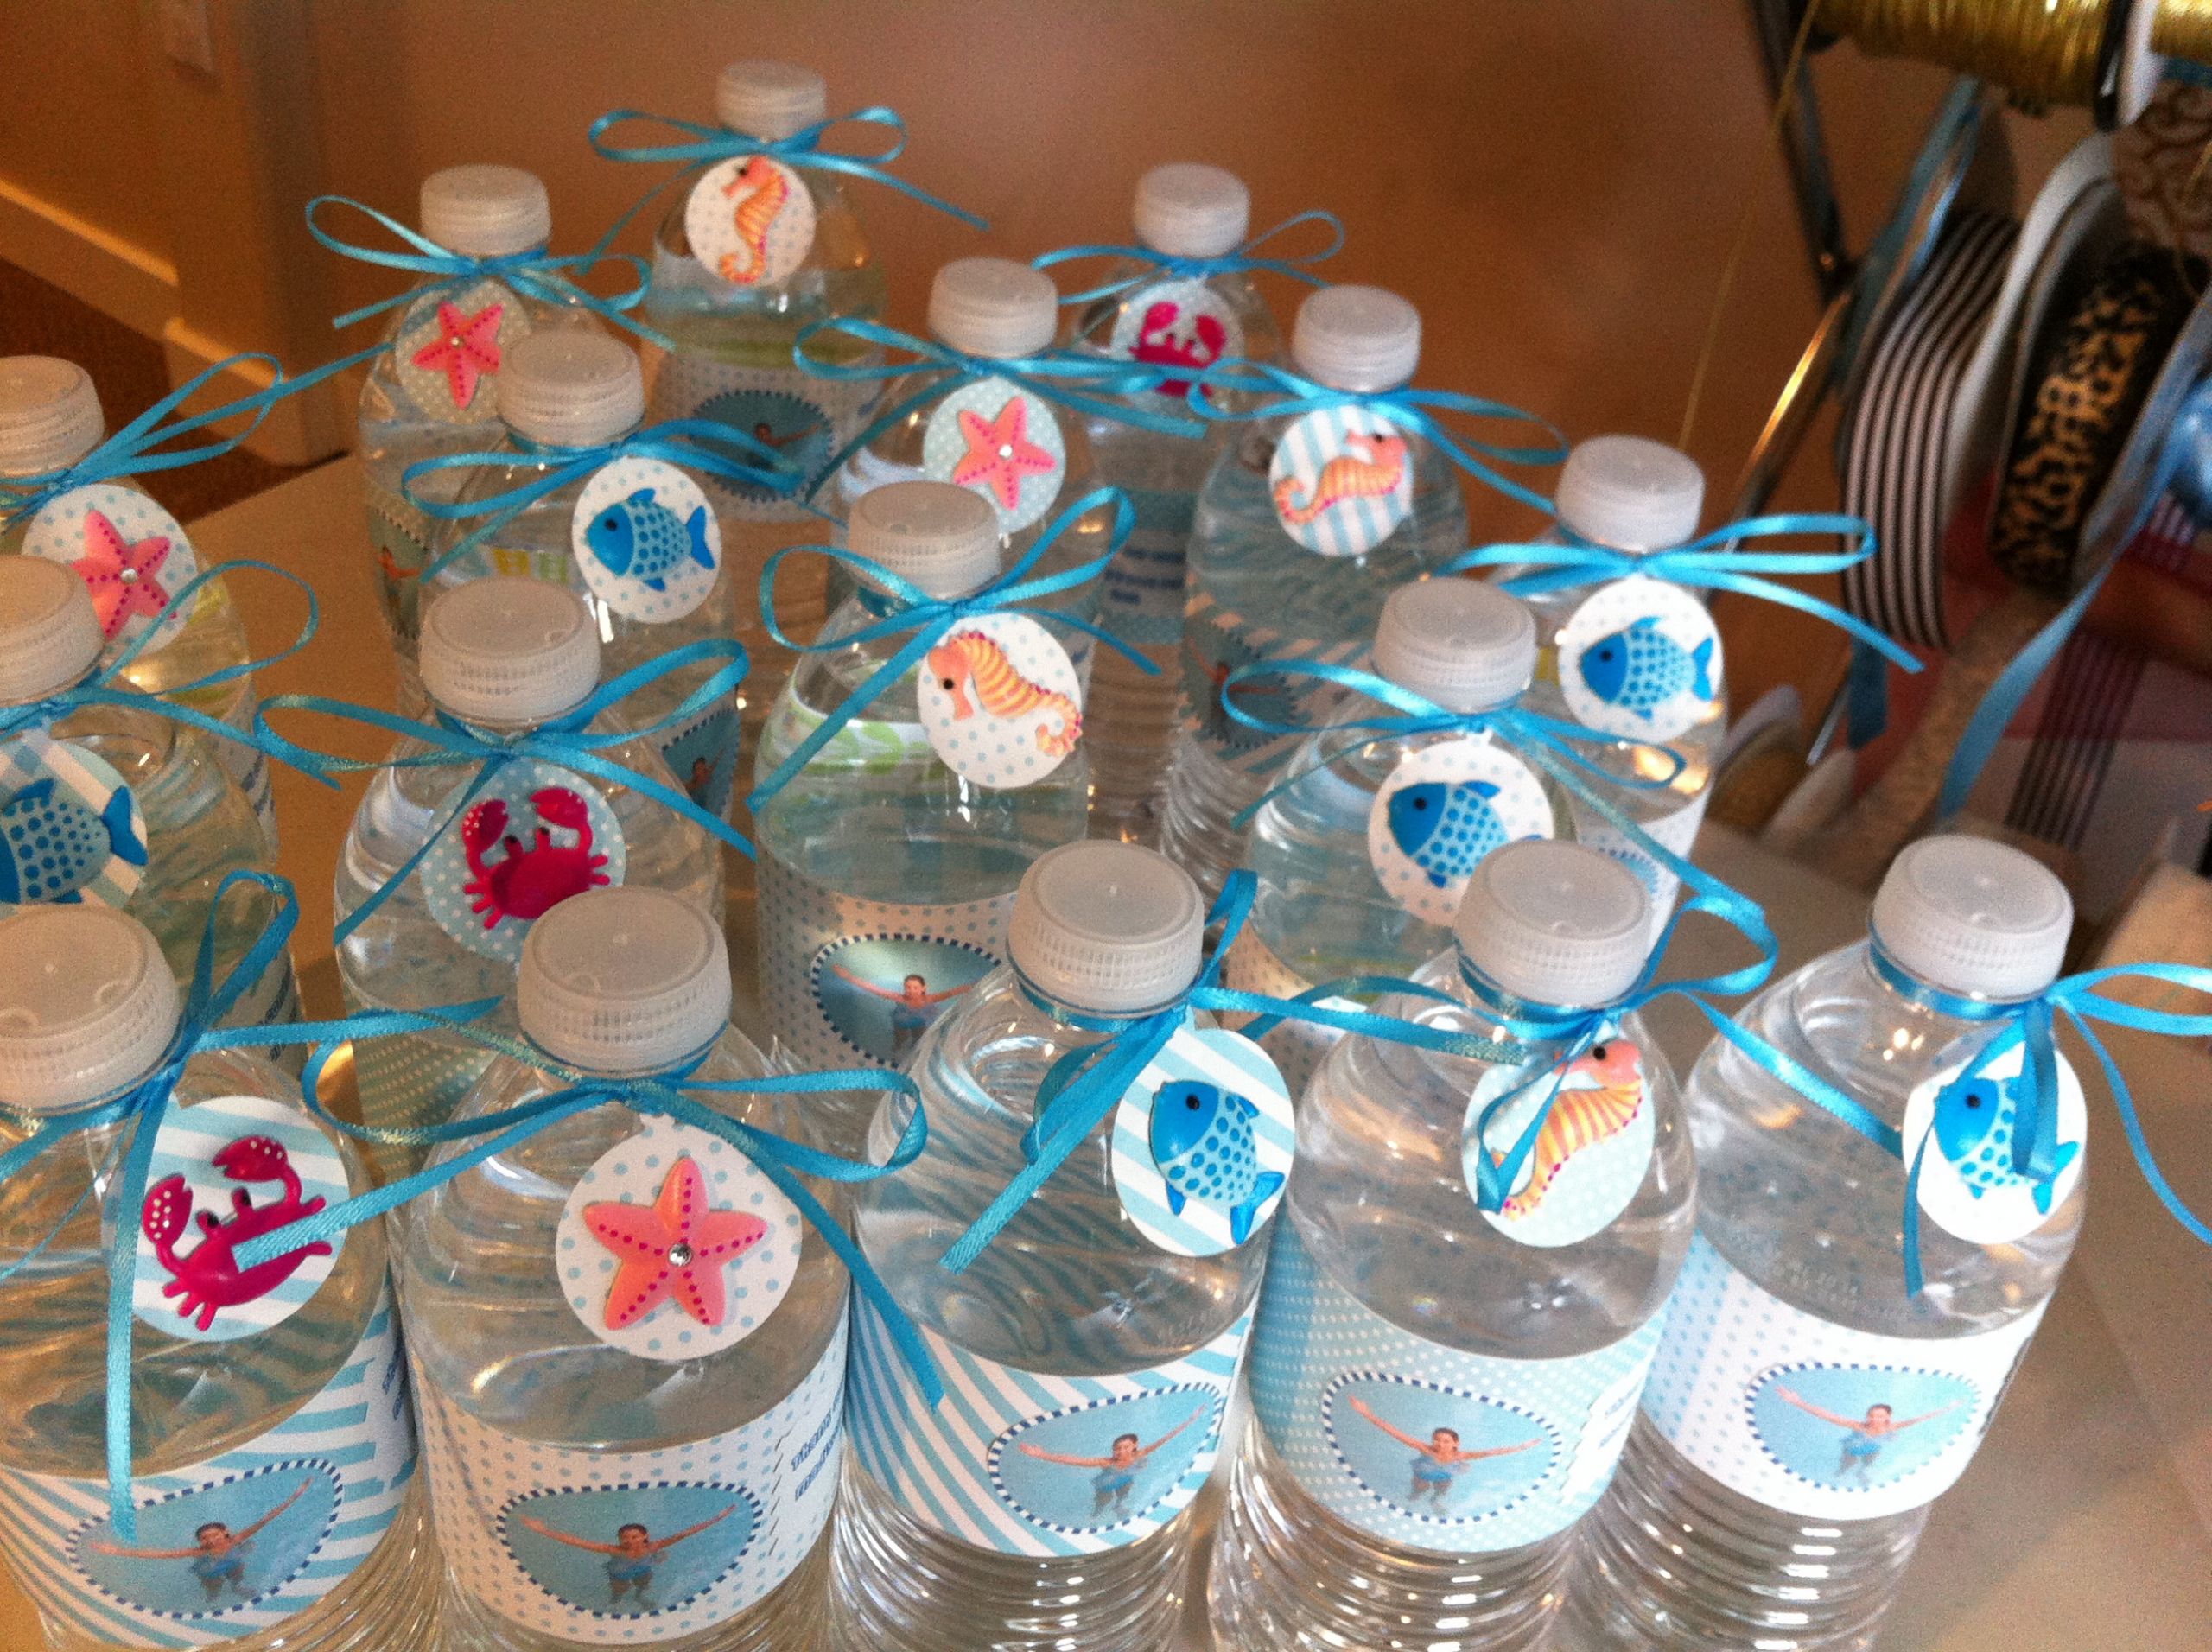 Pool Party Favors Ideas For Kids
 Kids Pool Party on Pinterest